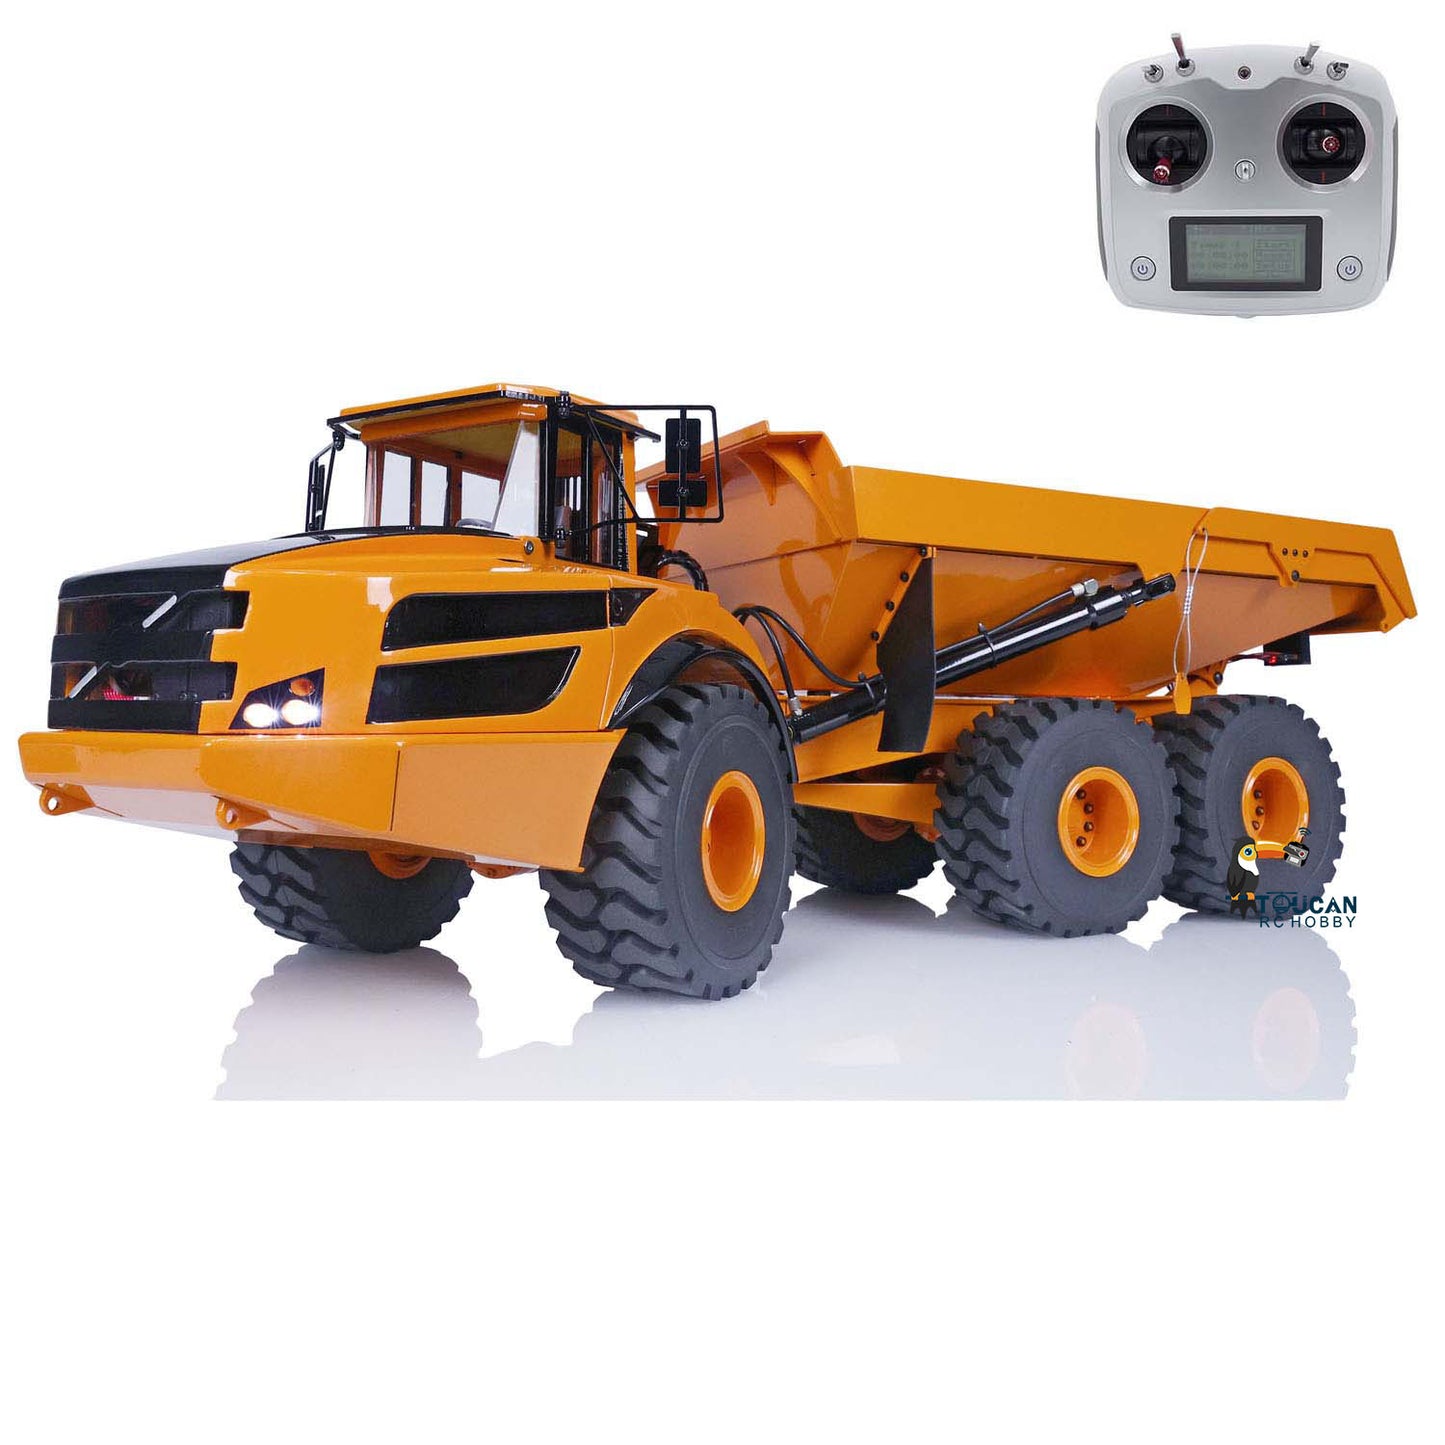 XDRC 1/14 Remote Control Dumper Car 6X6 RC Hydraulic Articulated Truck A40G Model Construction Cars Radio Controlled Vehicles